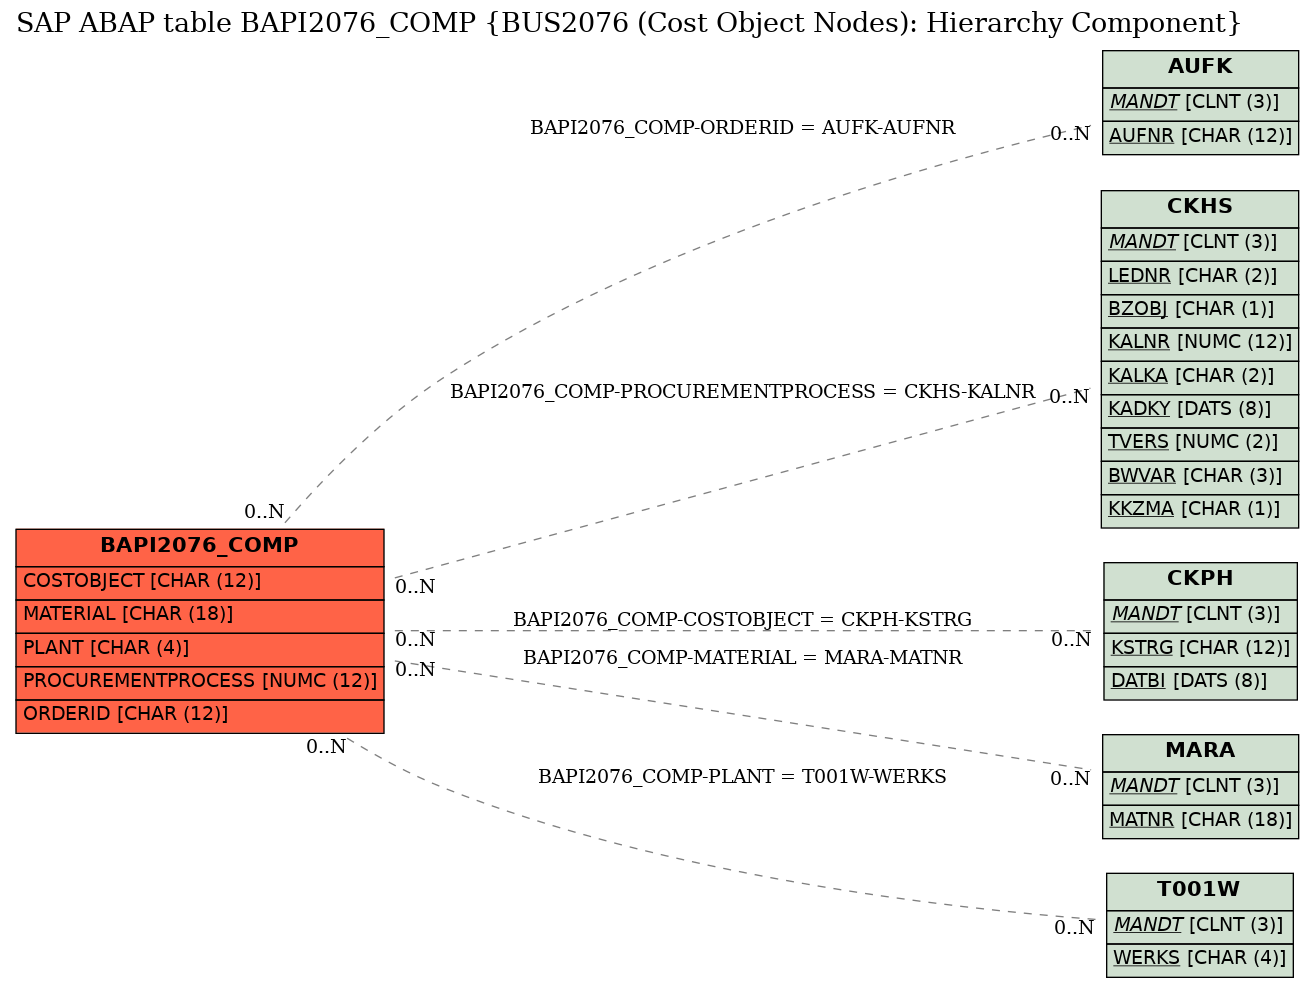 E-R Diagram for table BAPI2076_COMP (BUS2076 (Cost Object Nodes): Hierarchy Component)